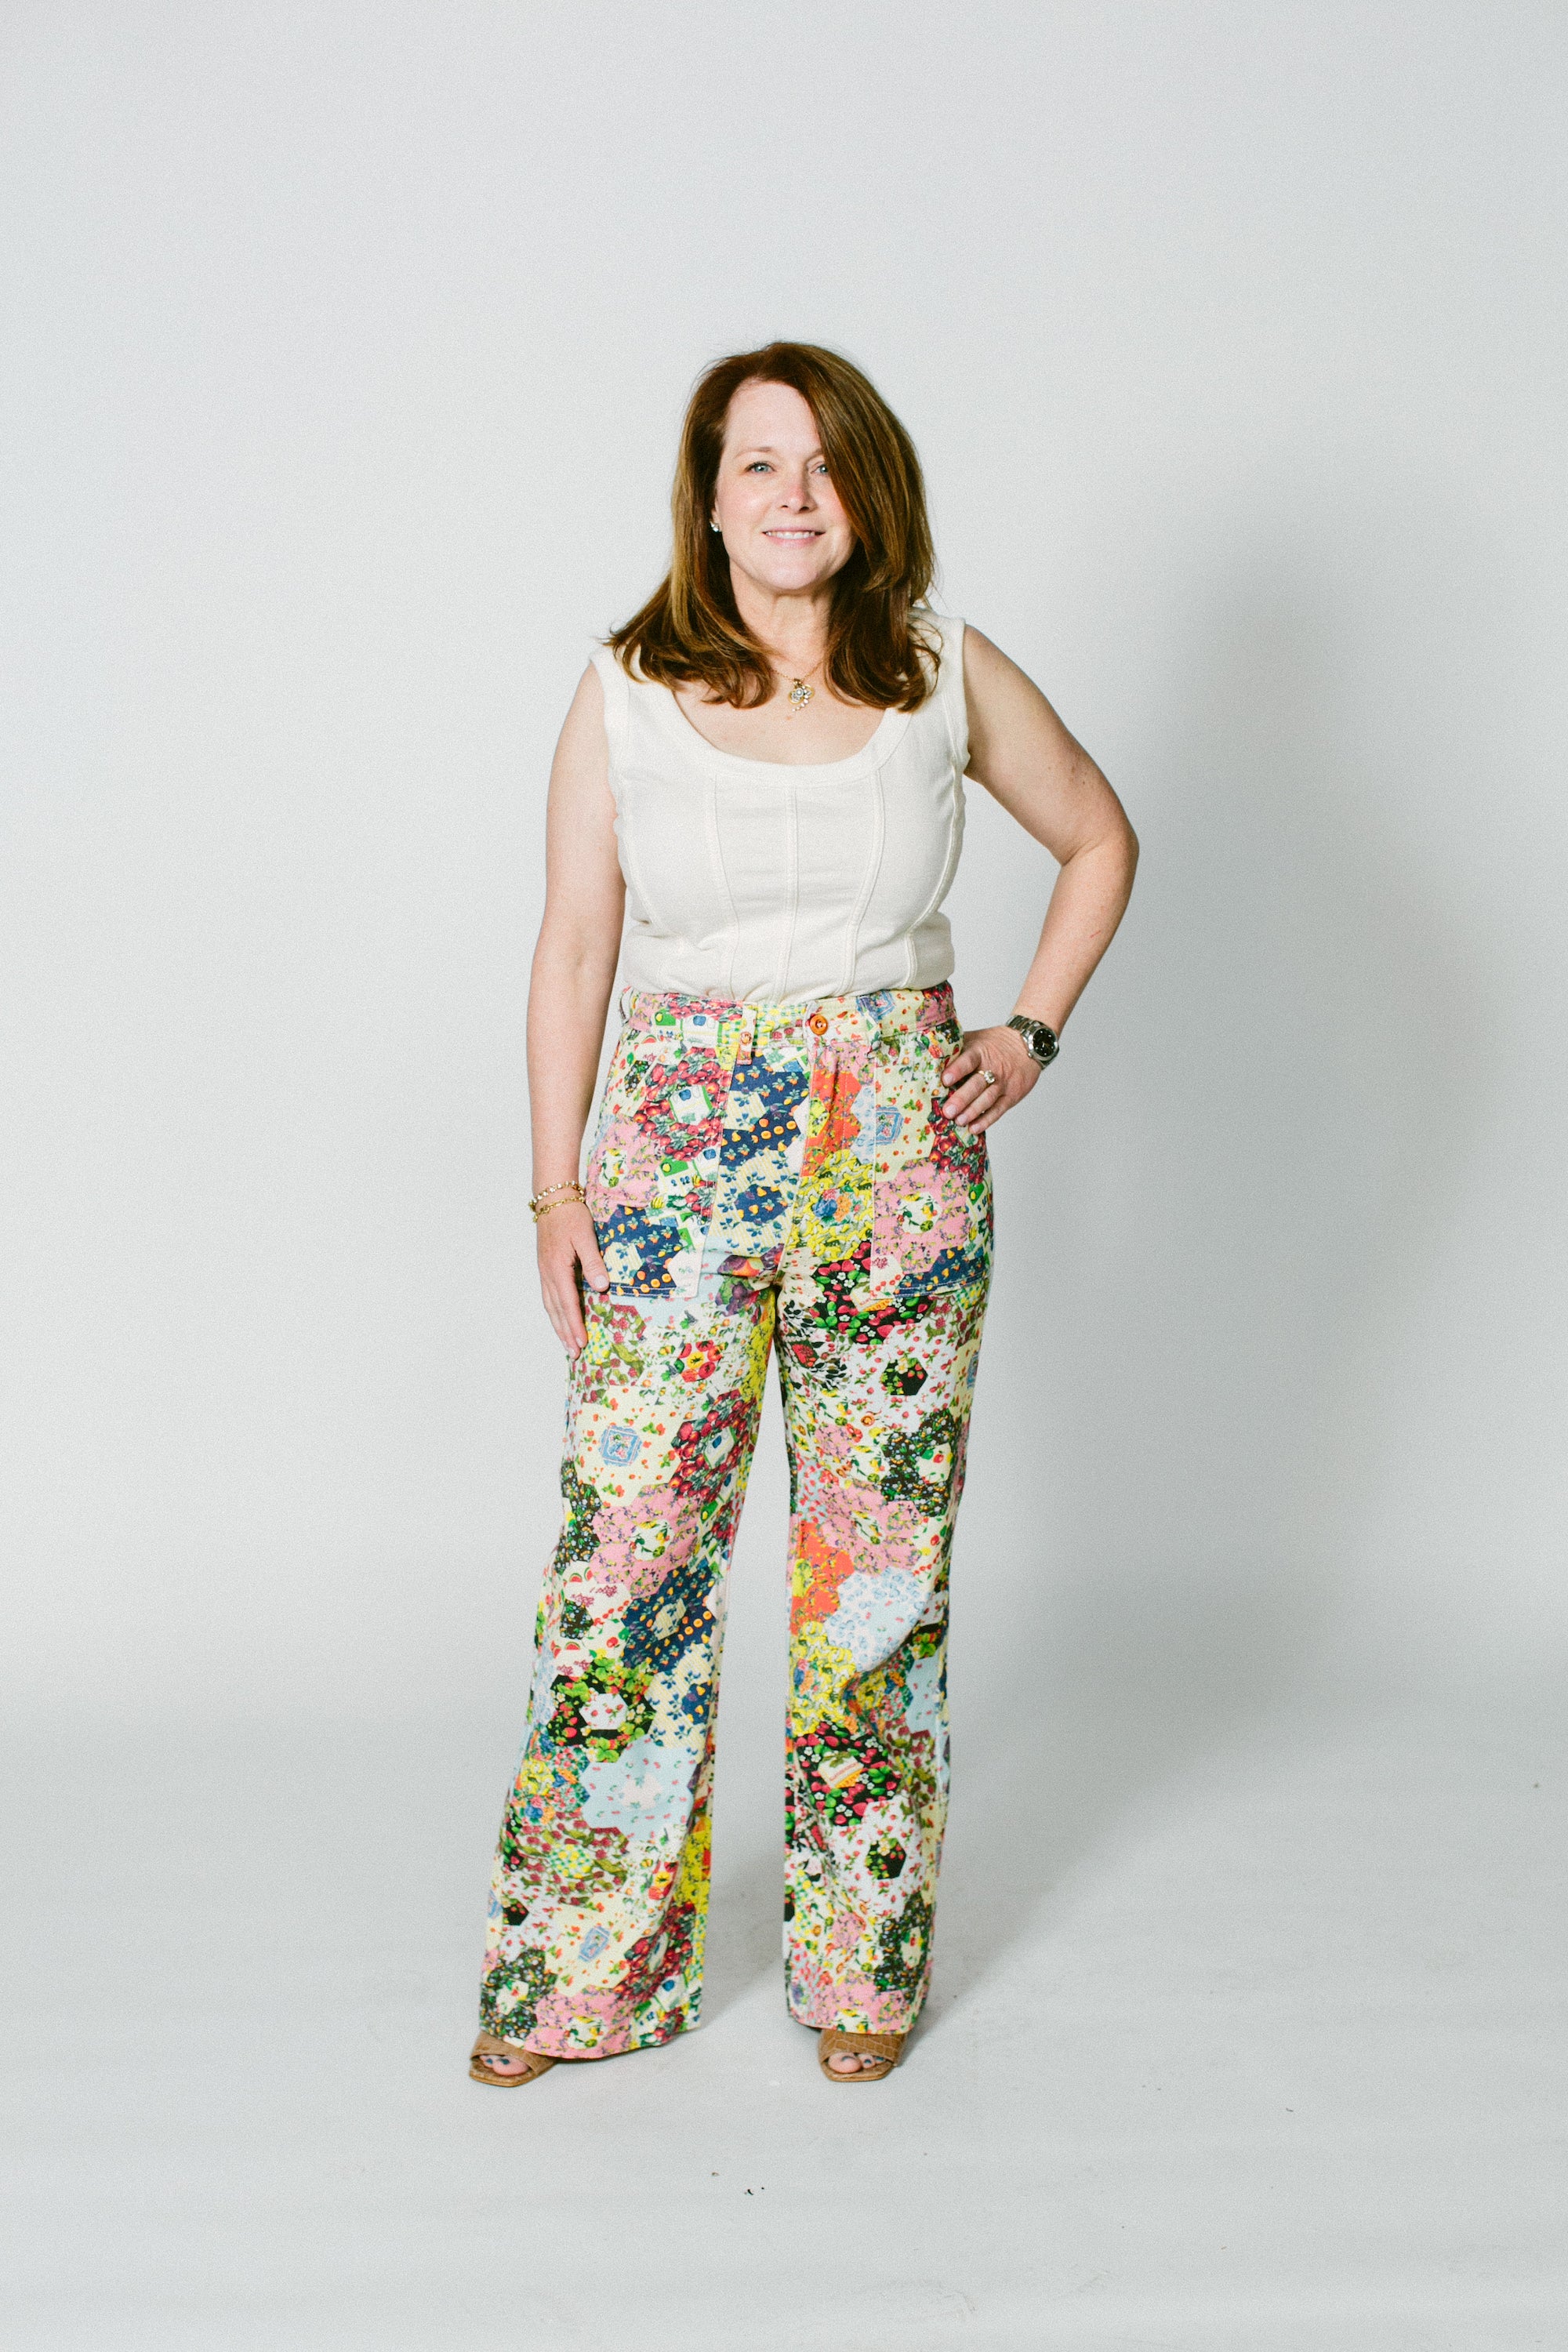 marisa, a white woman, wears the alabama chanin ivory corset top with some over the top floral rachel antonoff pants.